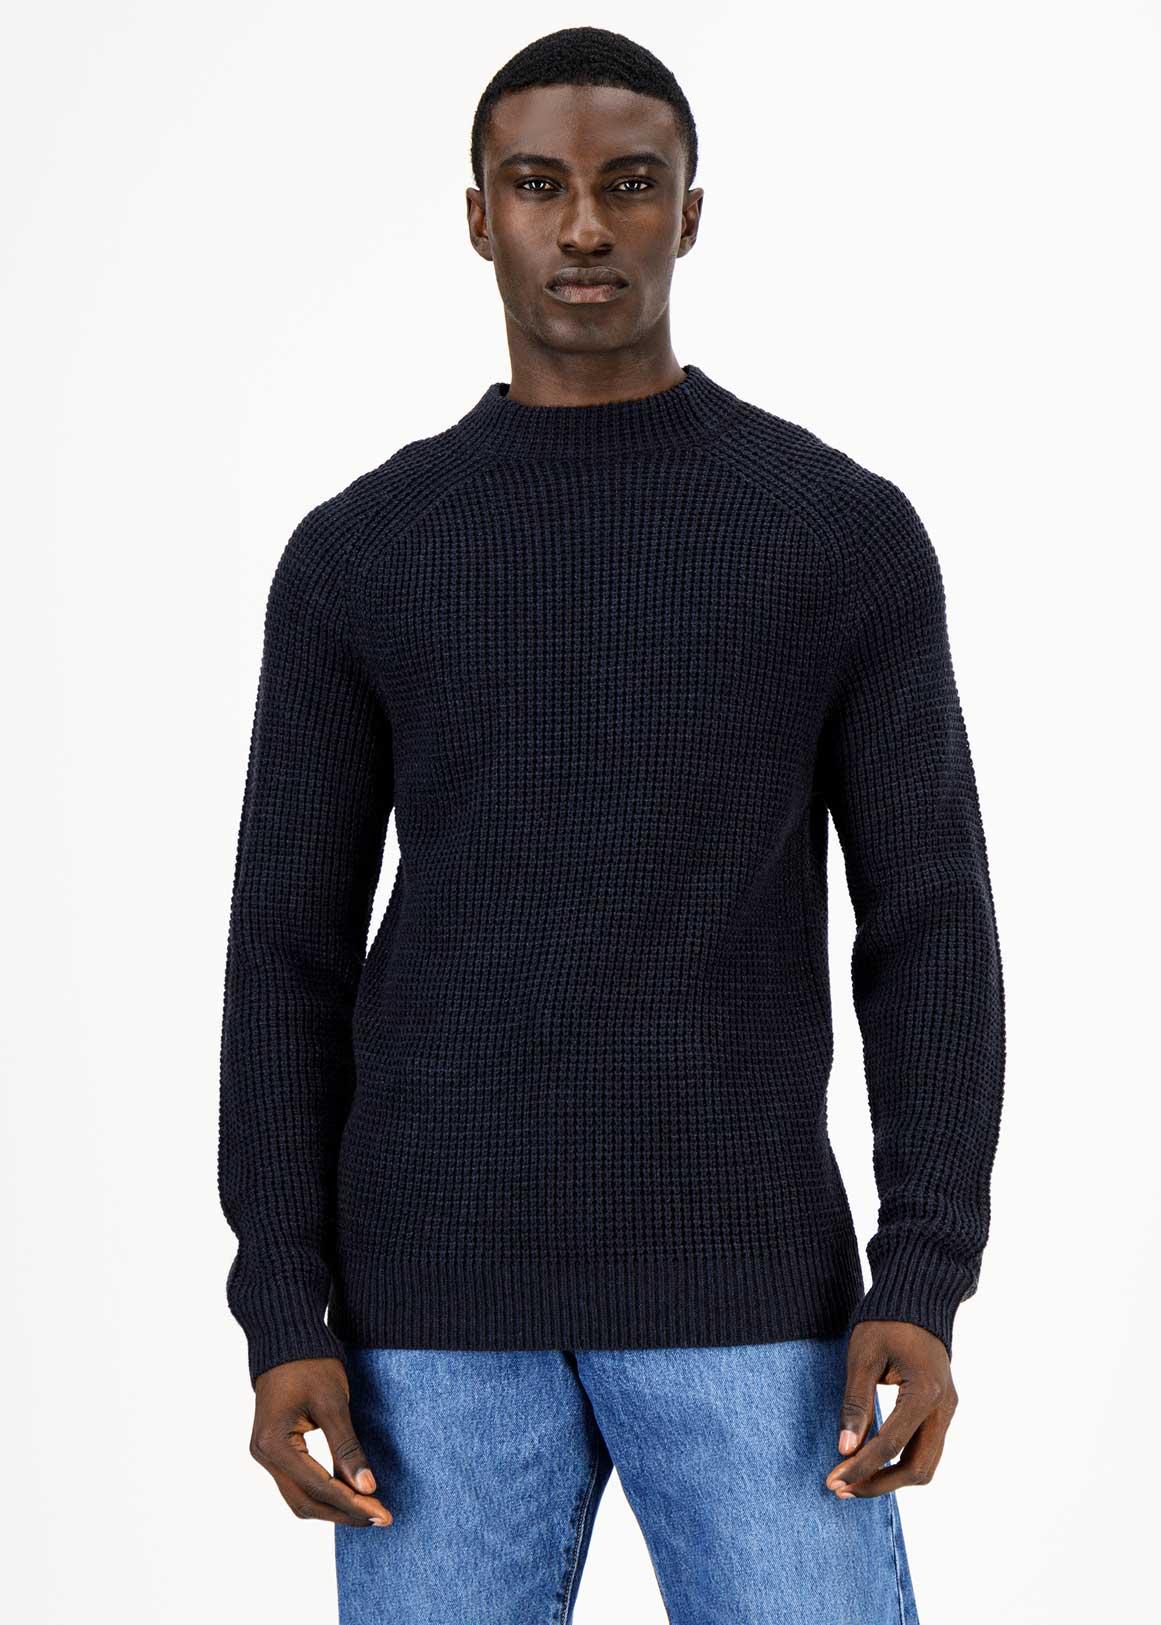 Textured Waffle-Knit Crew-Neck Sweater